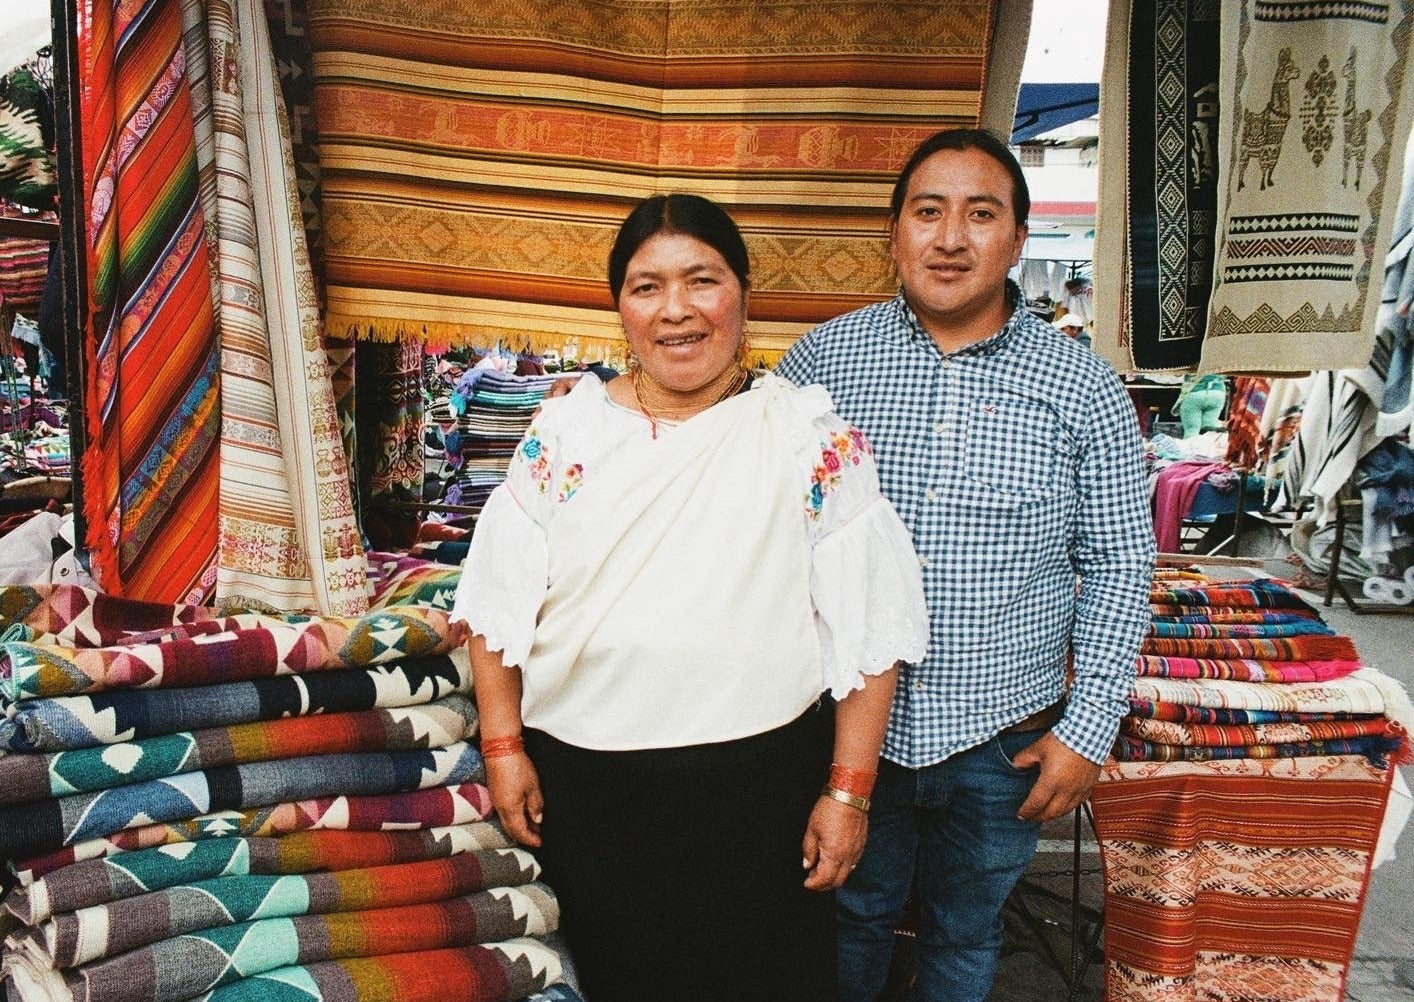 Artisans of Ecuador captured on film. They stand outside at their market displaying the handmade textiles. 